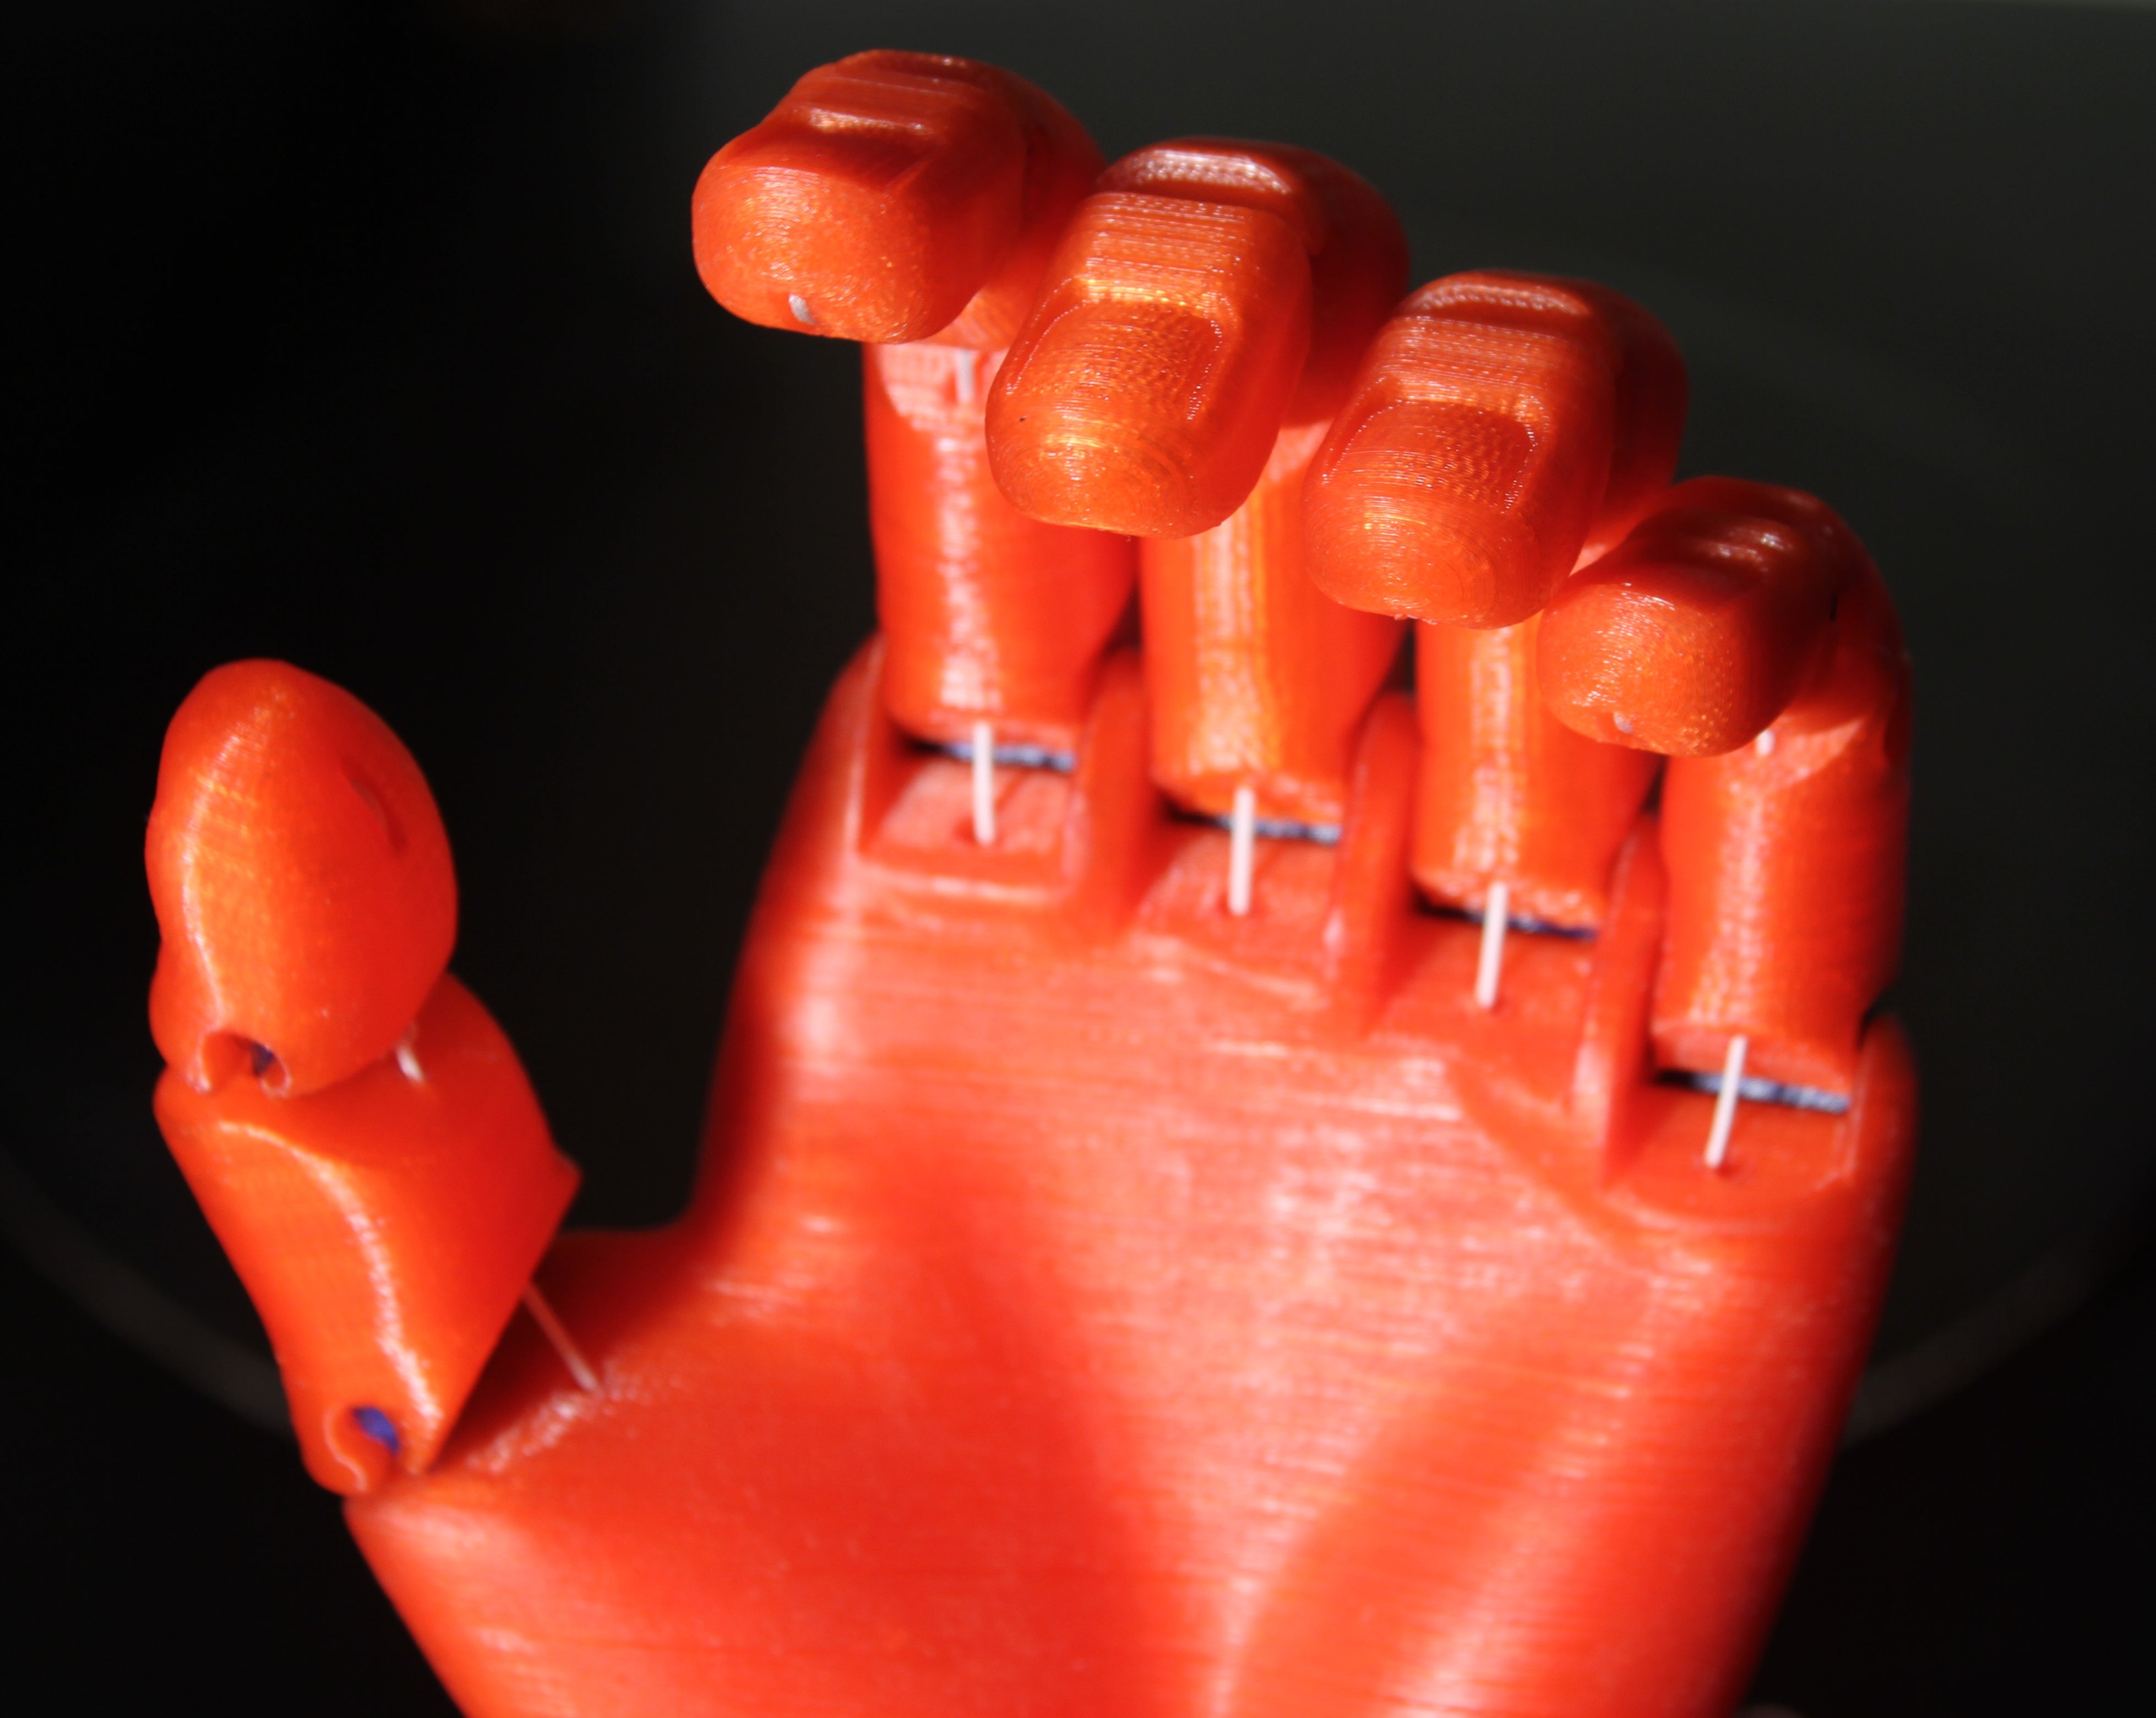 The FlexyHand 3D Printed Prosthesis (Proof of Concept)